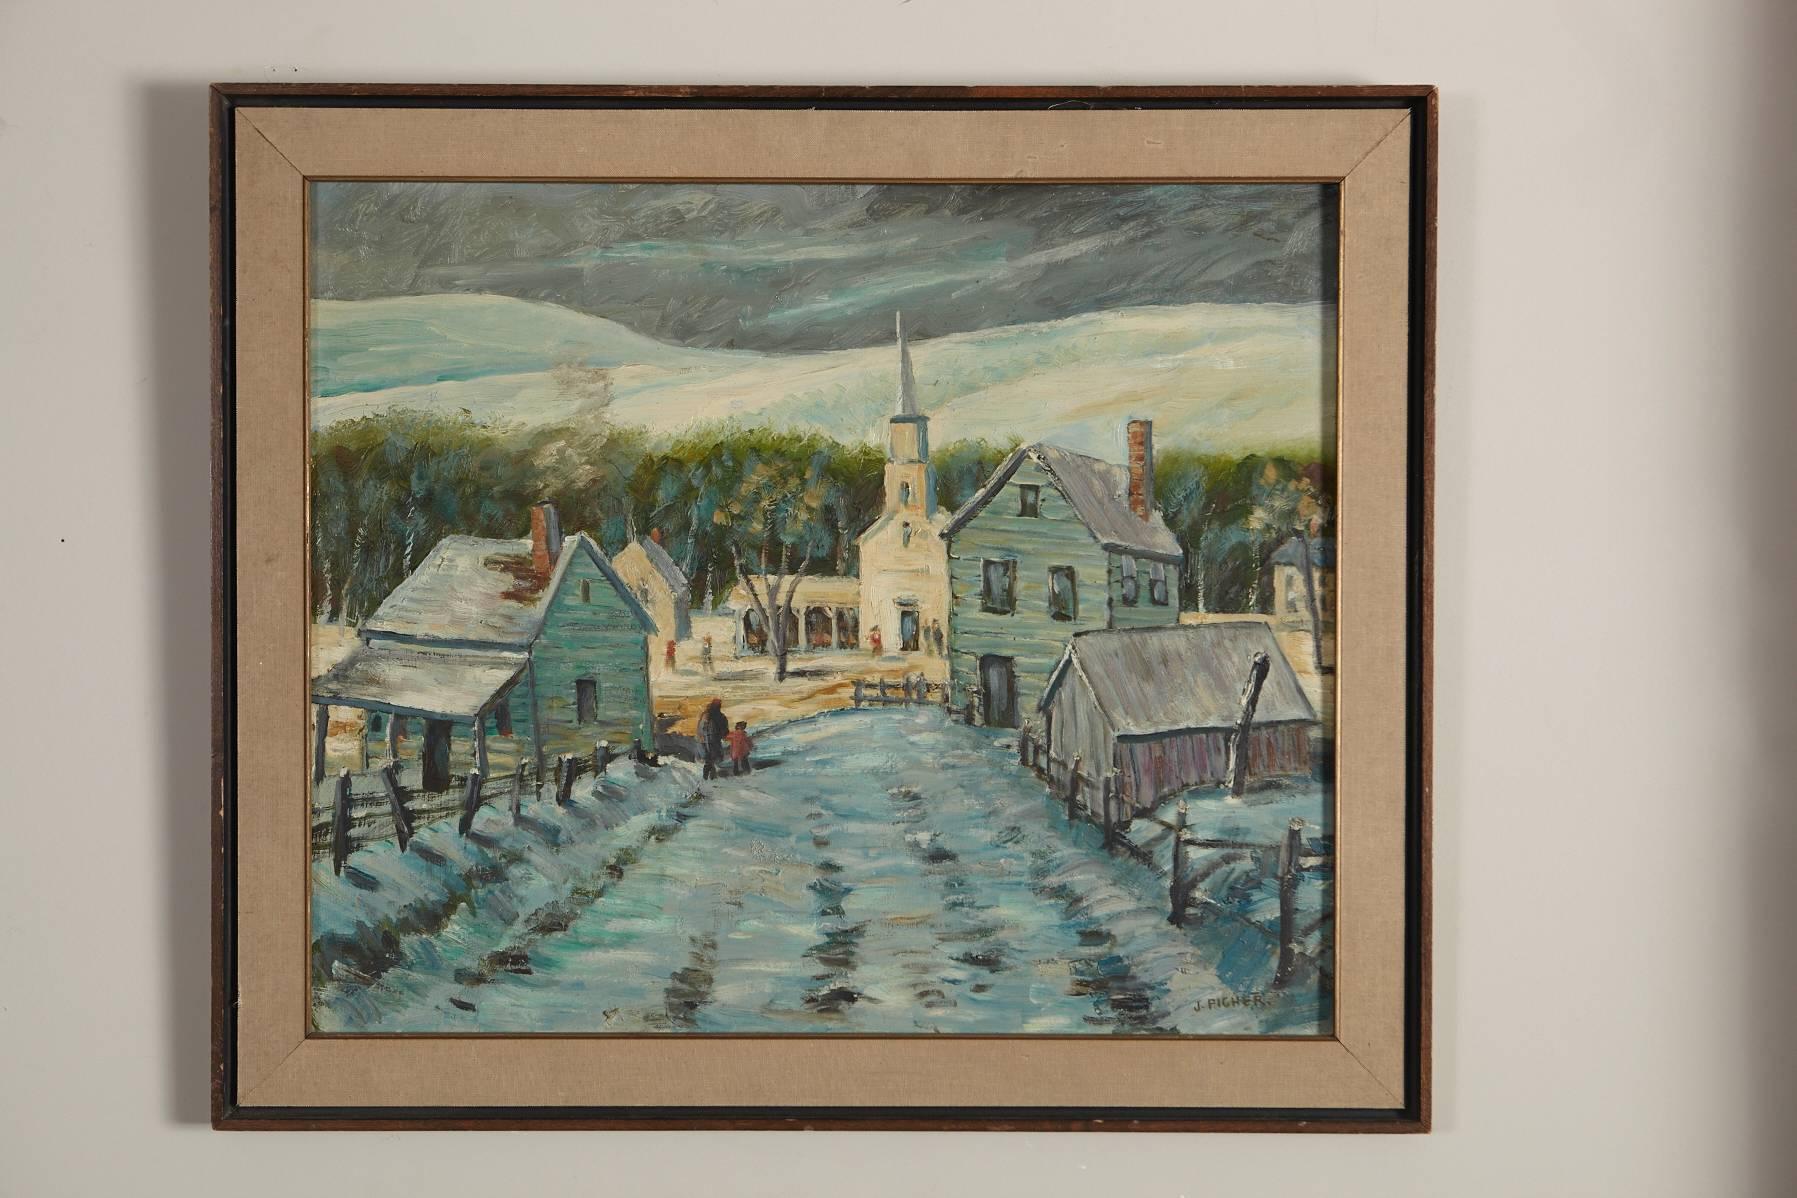 Idyllic plein-air winter scene of a village with snow covered mountains in the background. Thick impasto with nice depth and texture. Signed lower right corner J. Picher.

Great decoration piece for a cottage.

Although the board is stamped -